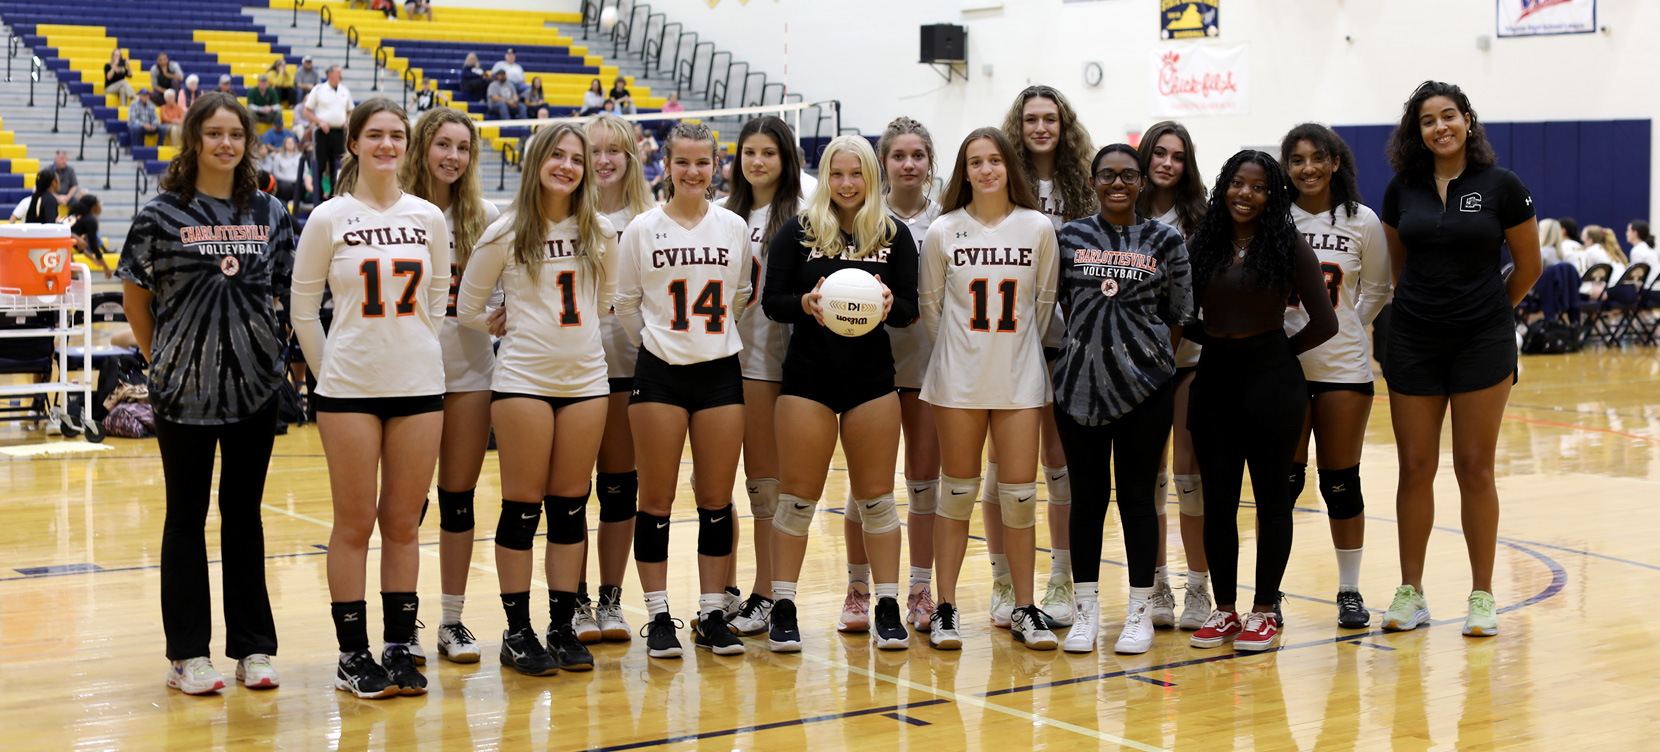 Peters, pictured with the Charlottesville High School varsity volleyball team, said working with young athletes has been a highlight of her time in Charlottesville.